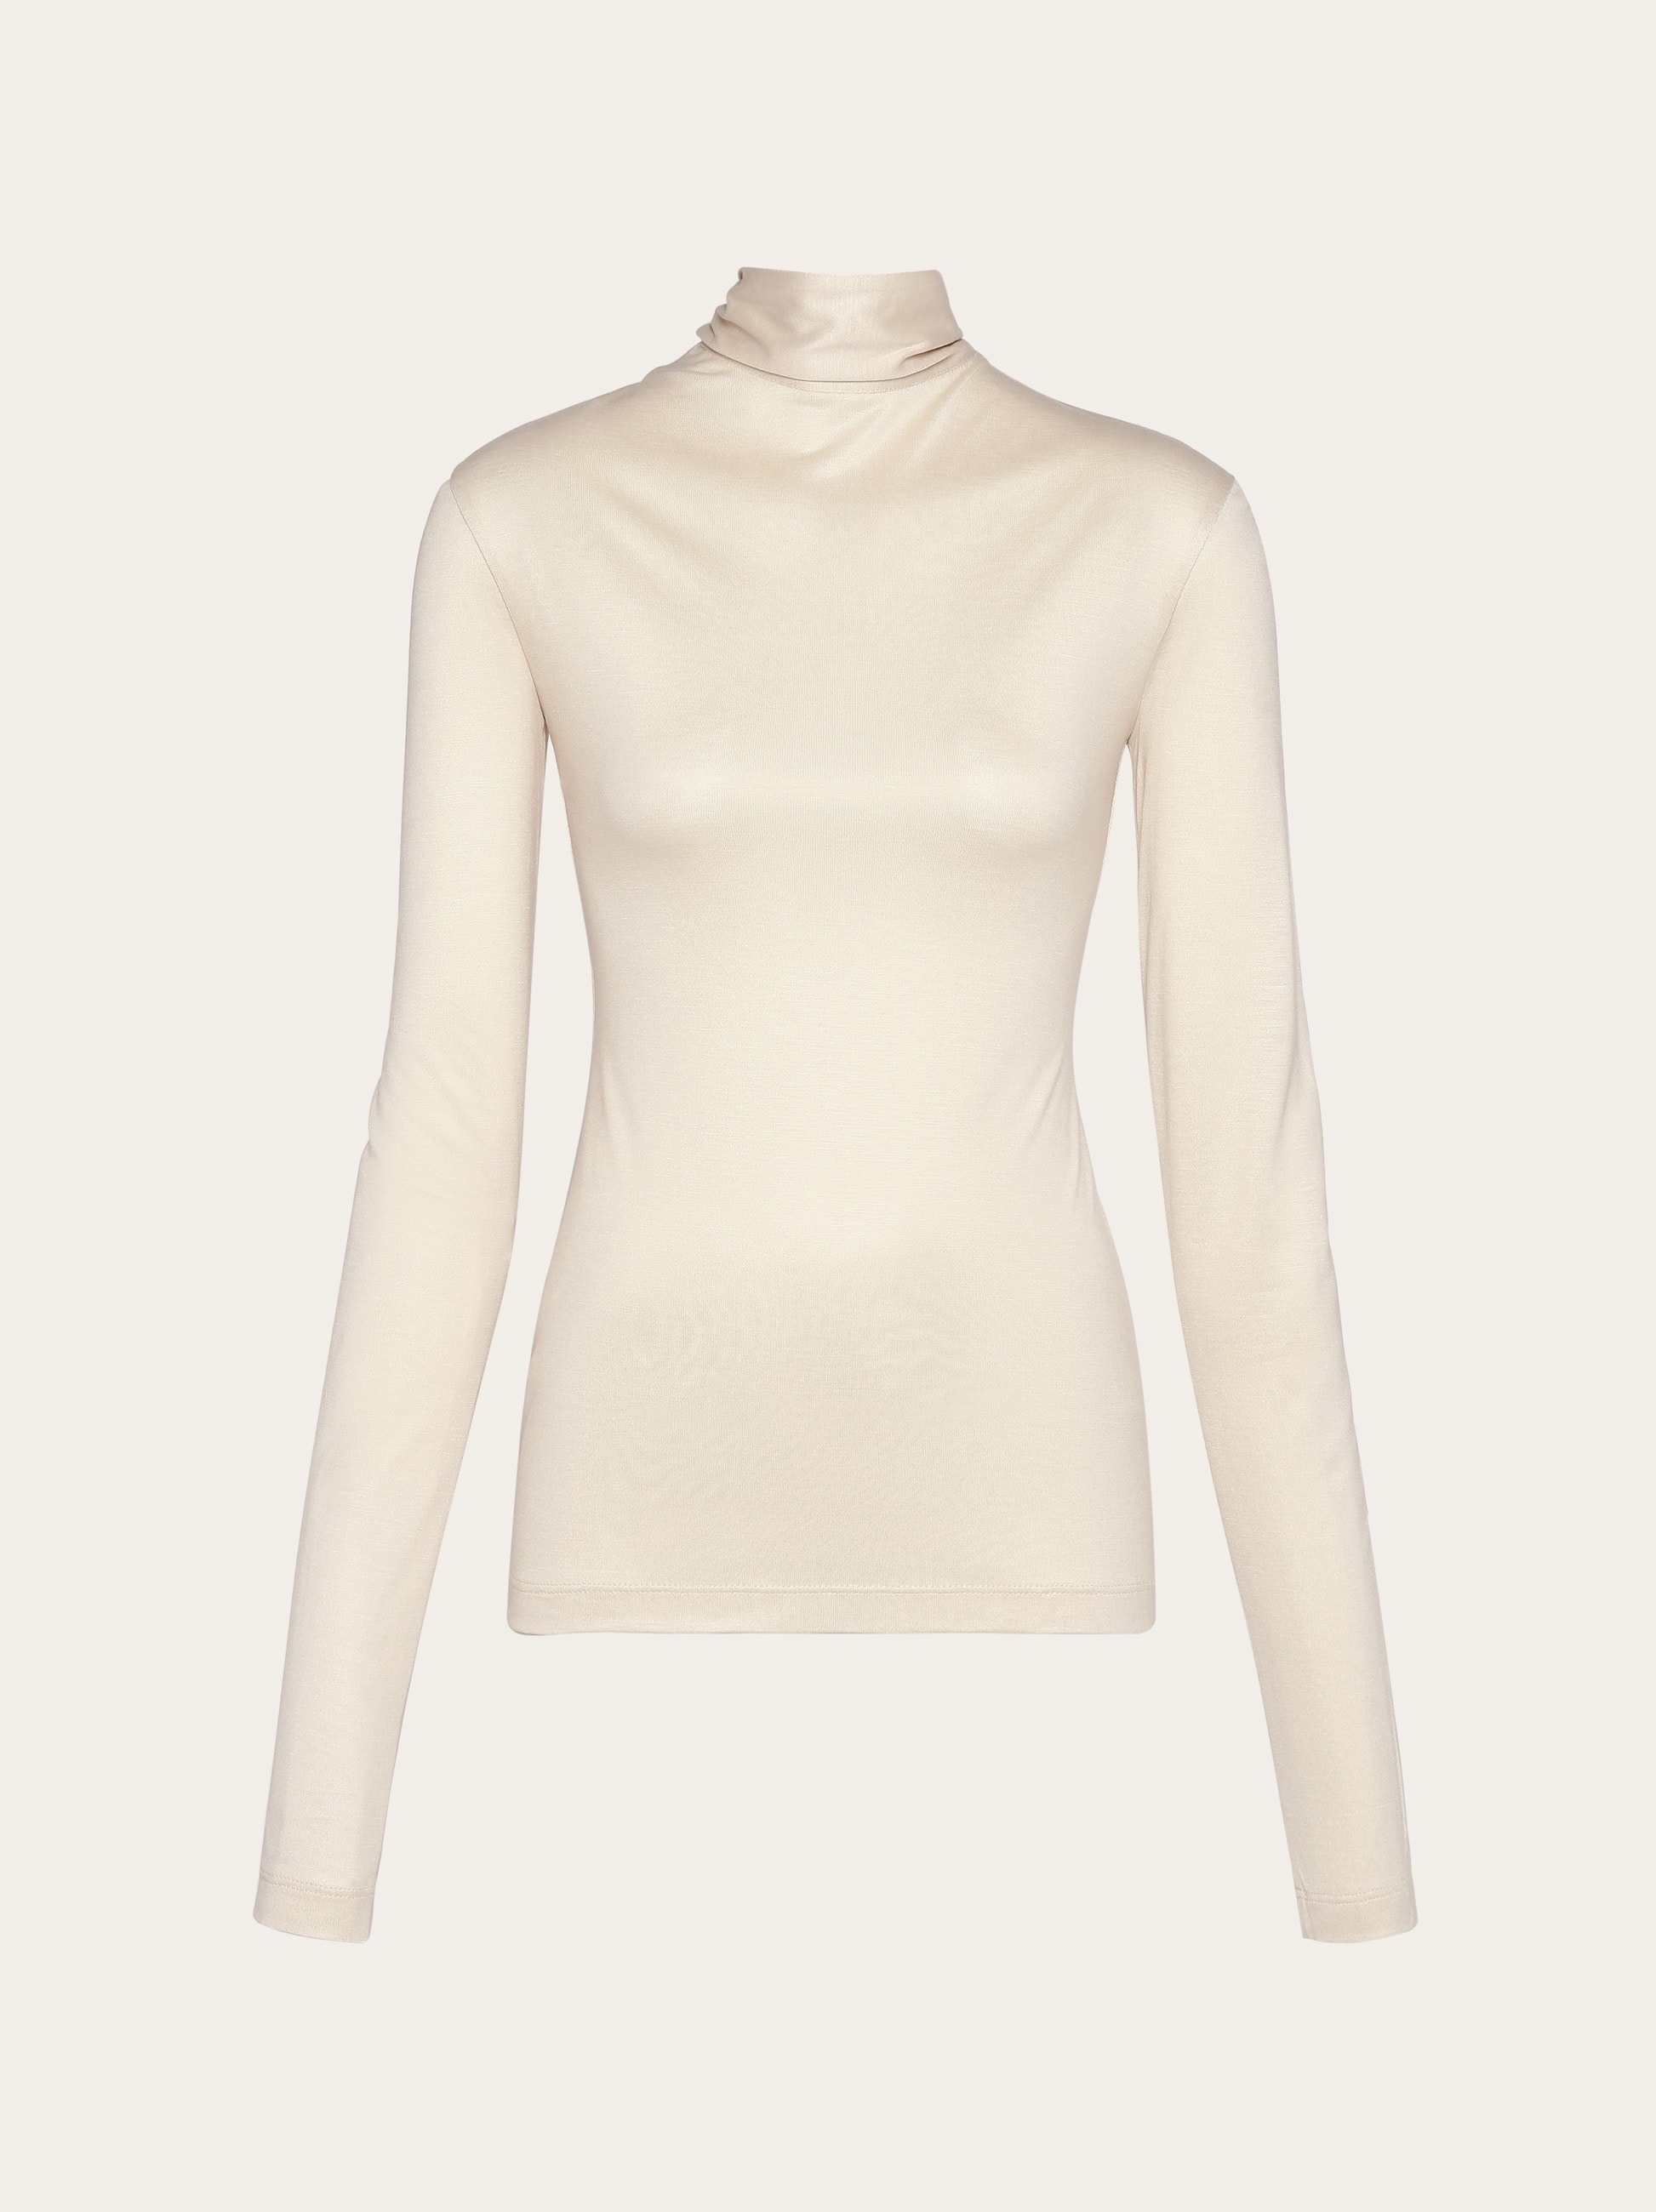 Jersey turtleneck with low cut back - 1